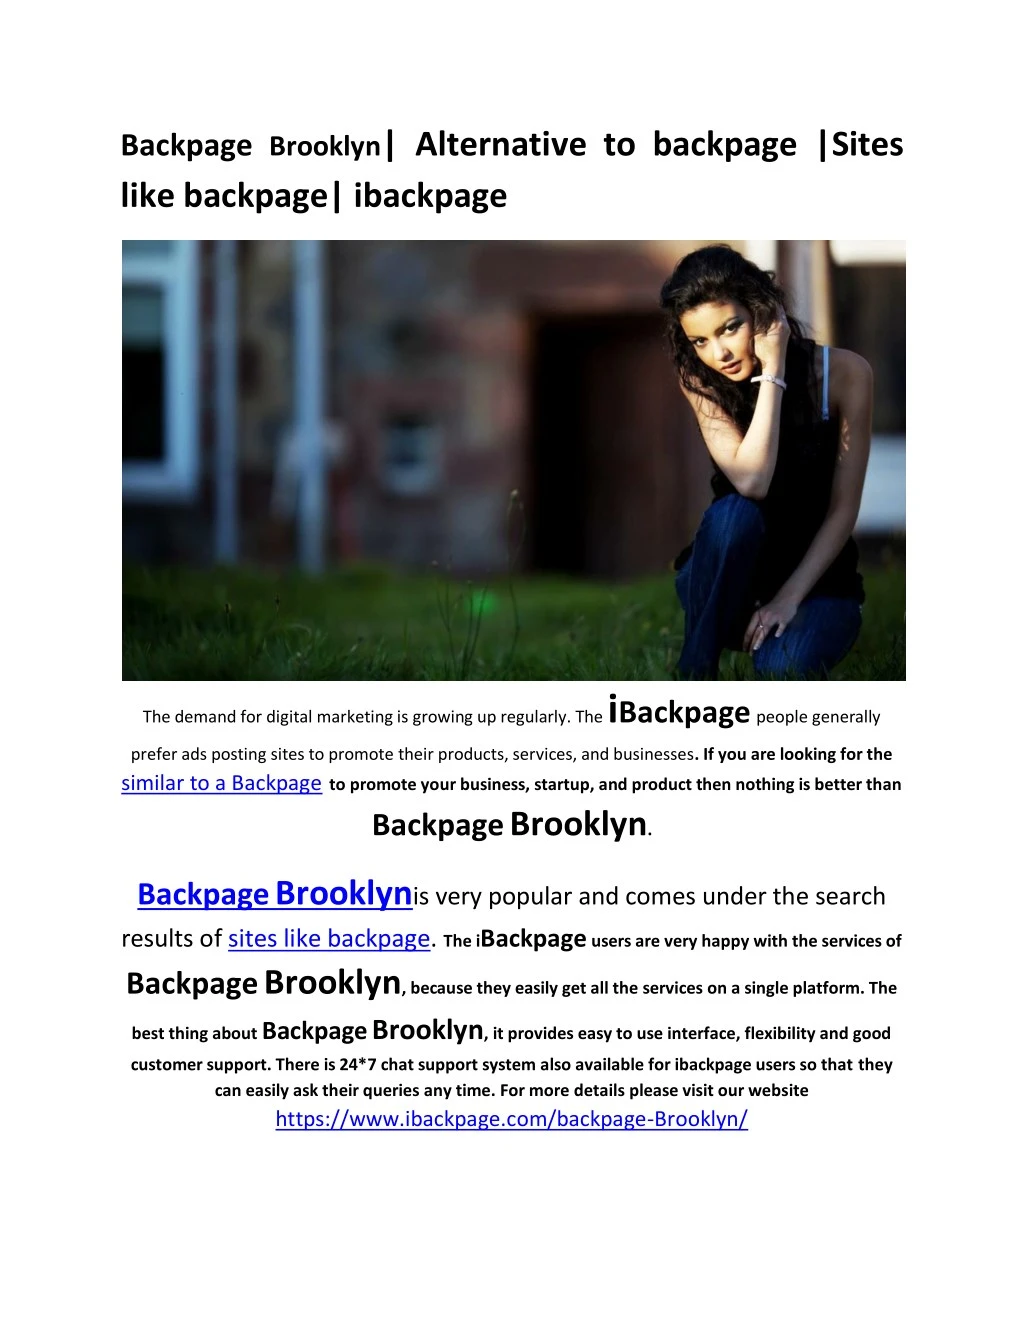 backpage brooklyn alternative to backpage sites